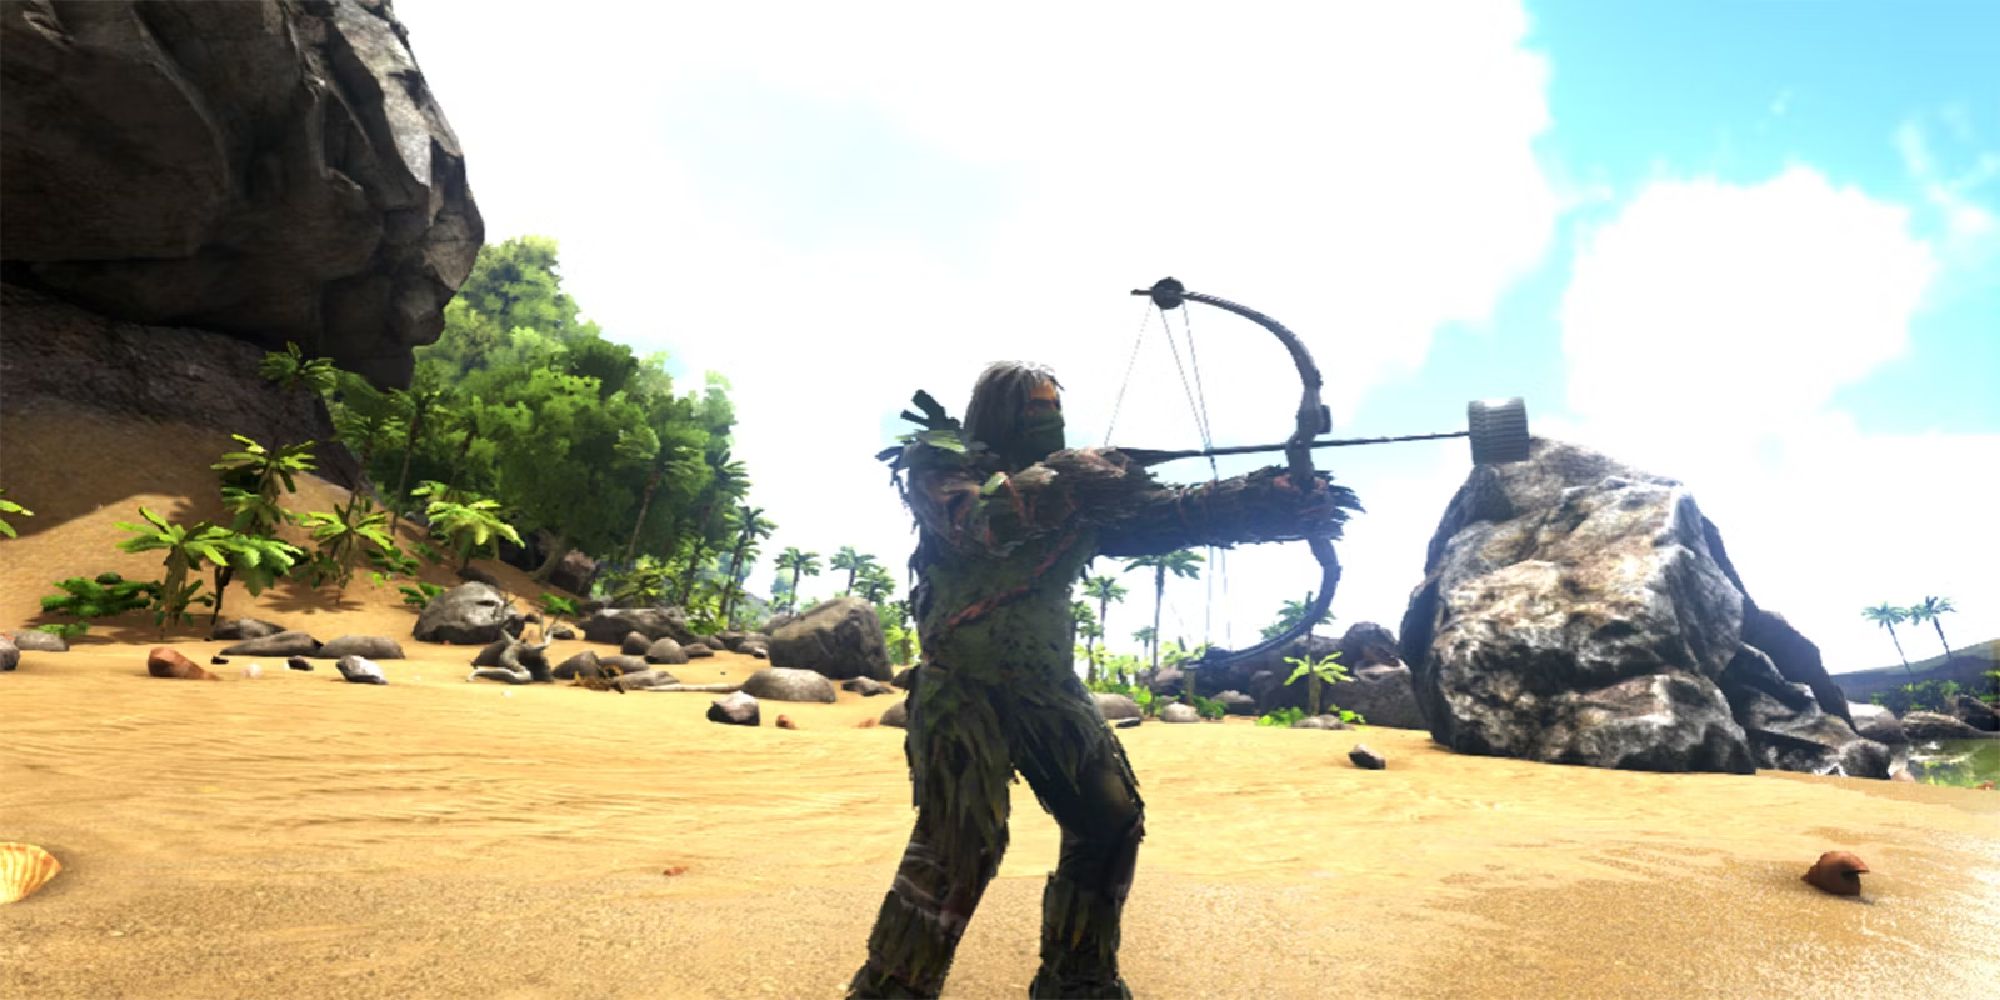 player holding a bow and arrow